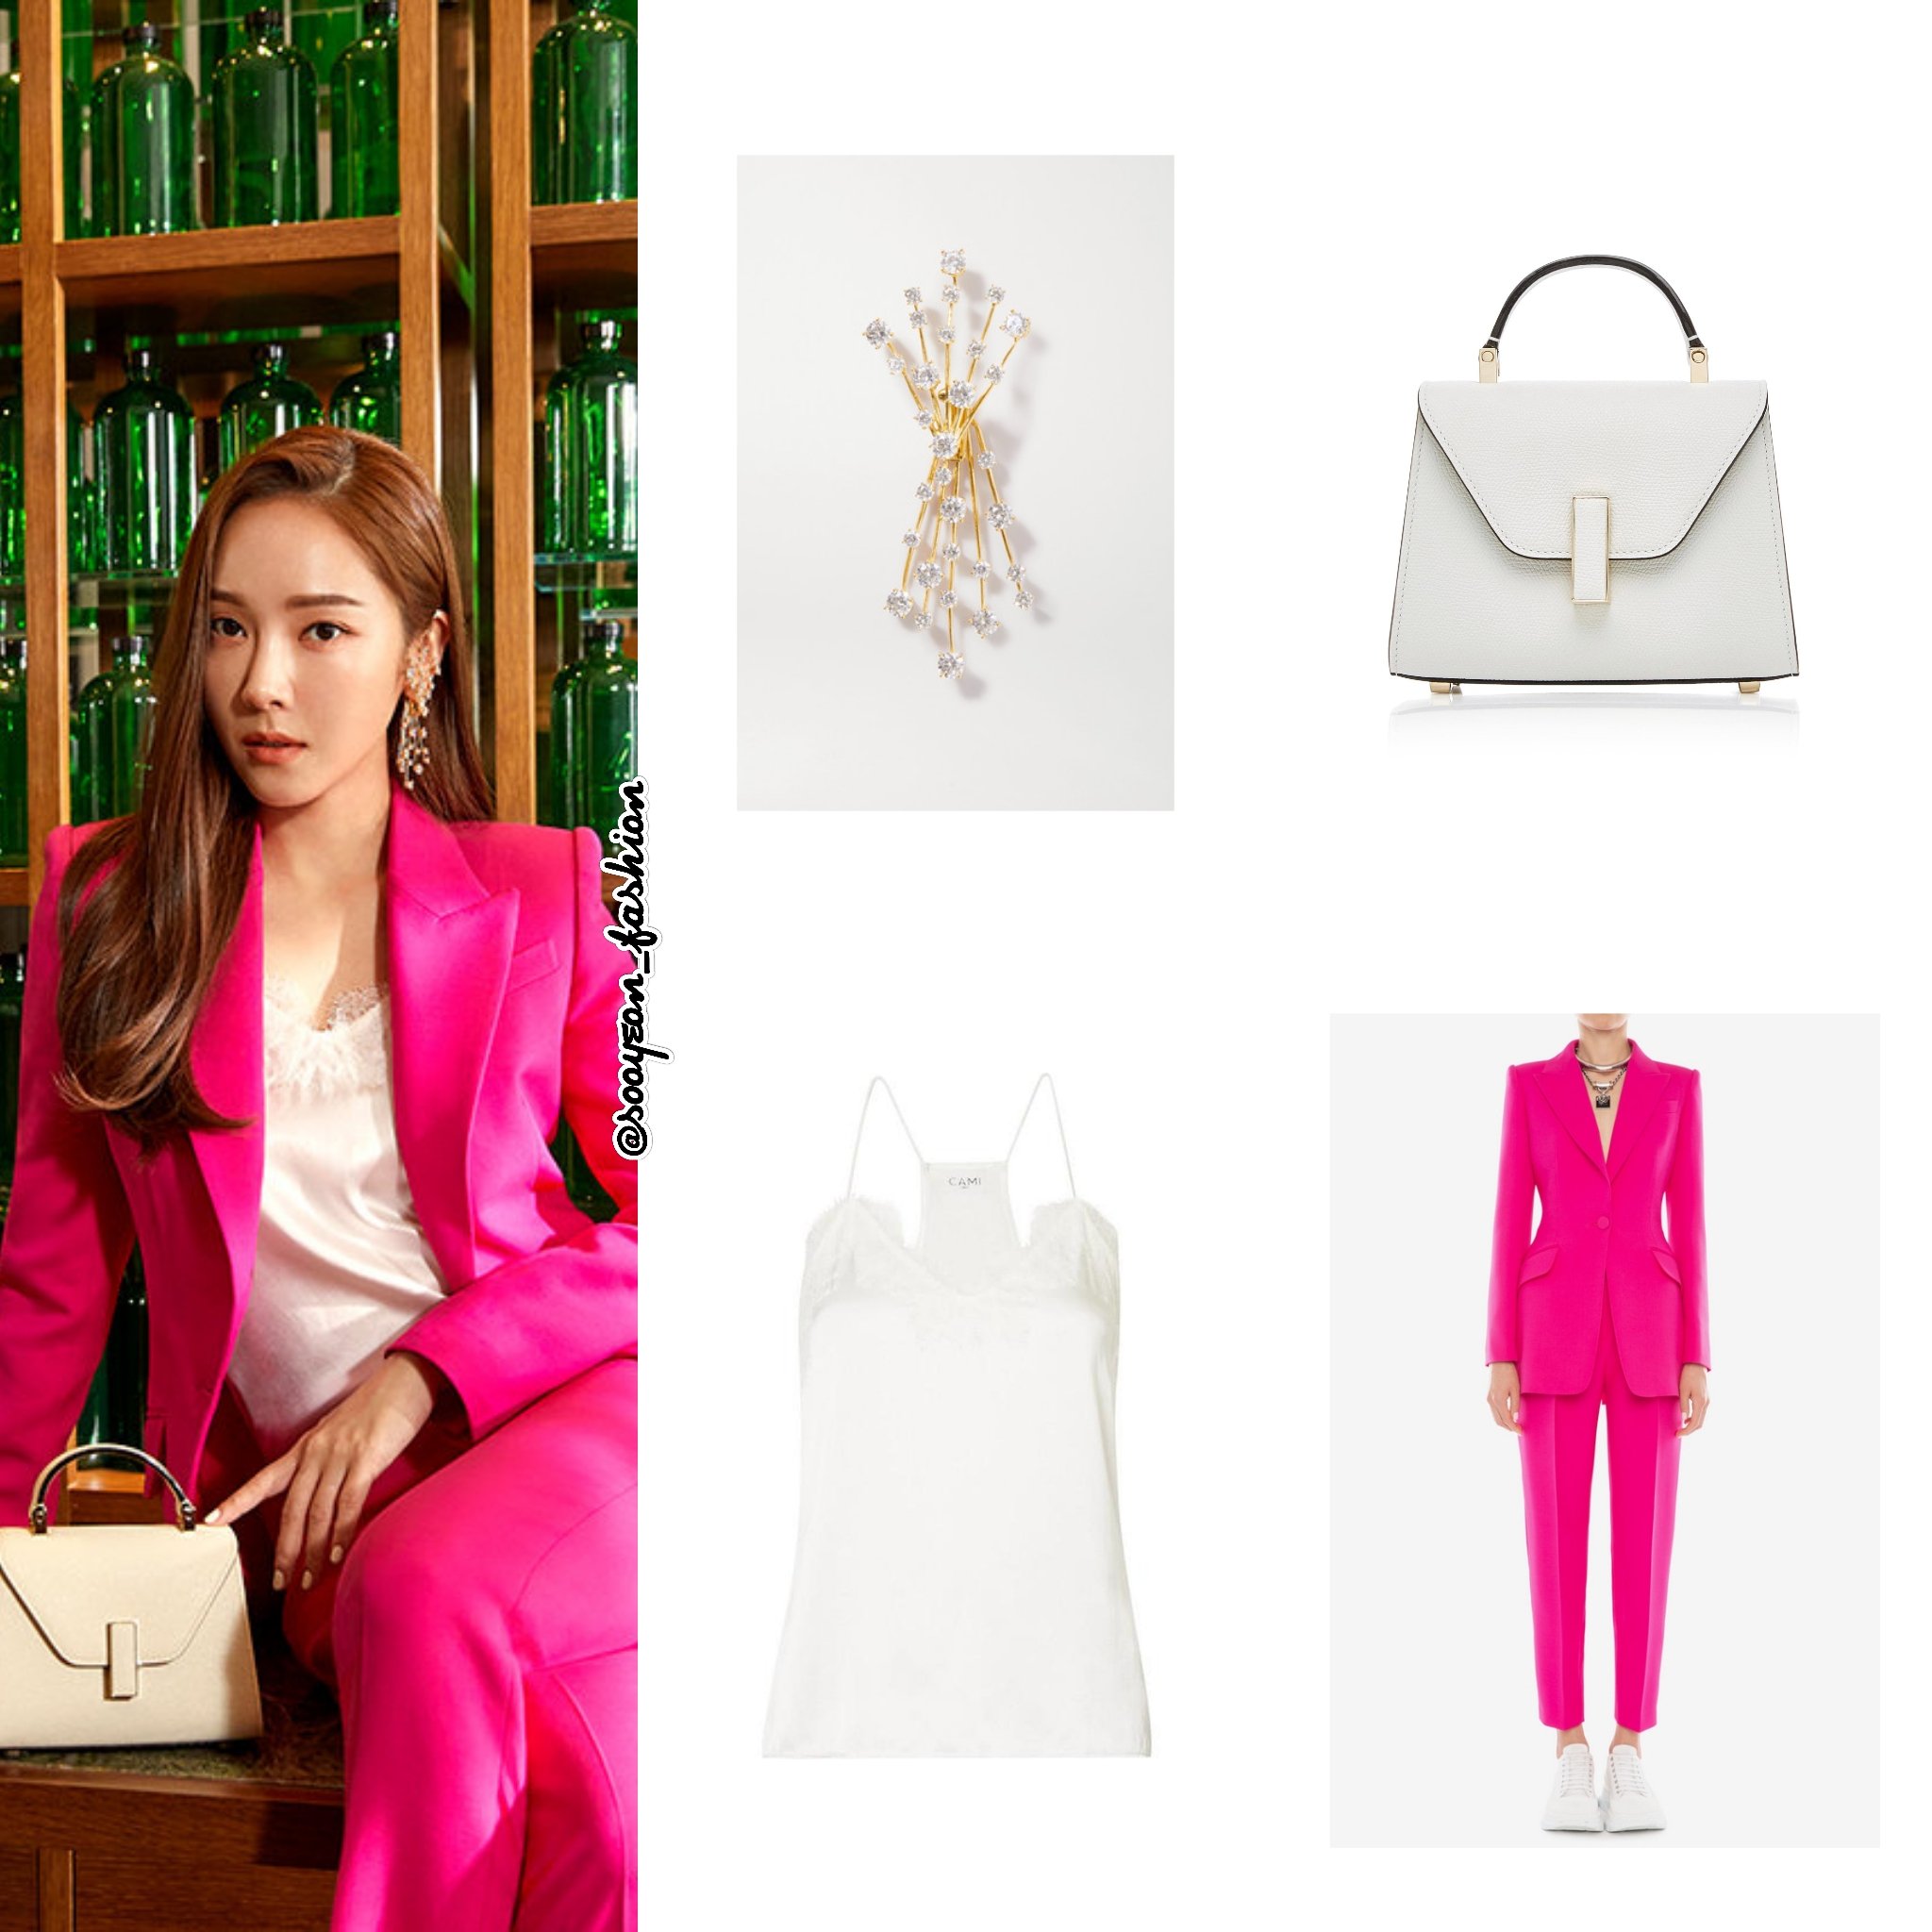 jsy fashion on X: 191031 Jessica Jung @ Louis Vuiton Cruise 2019 Spin-off  Show @LouisVuitton : 👉 Nanogram Hoop Earrings, $585 👉 Jacket (€5,200)  & skirt (€1,900) from Cruise 2020 Collection 👉